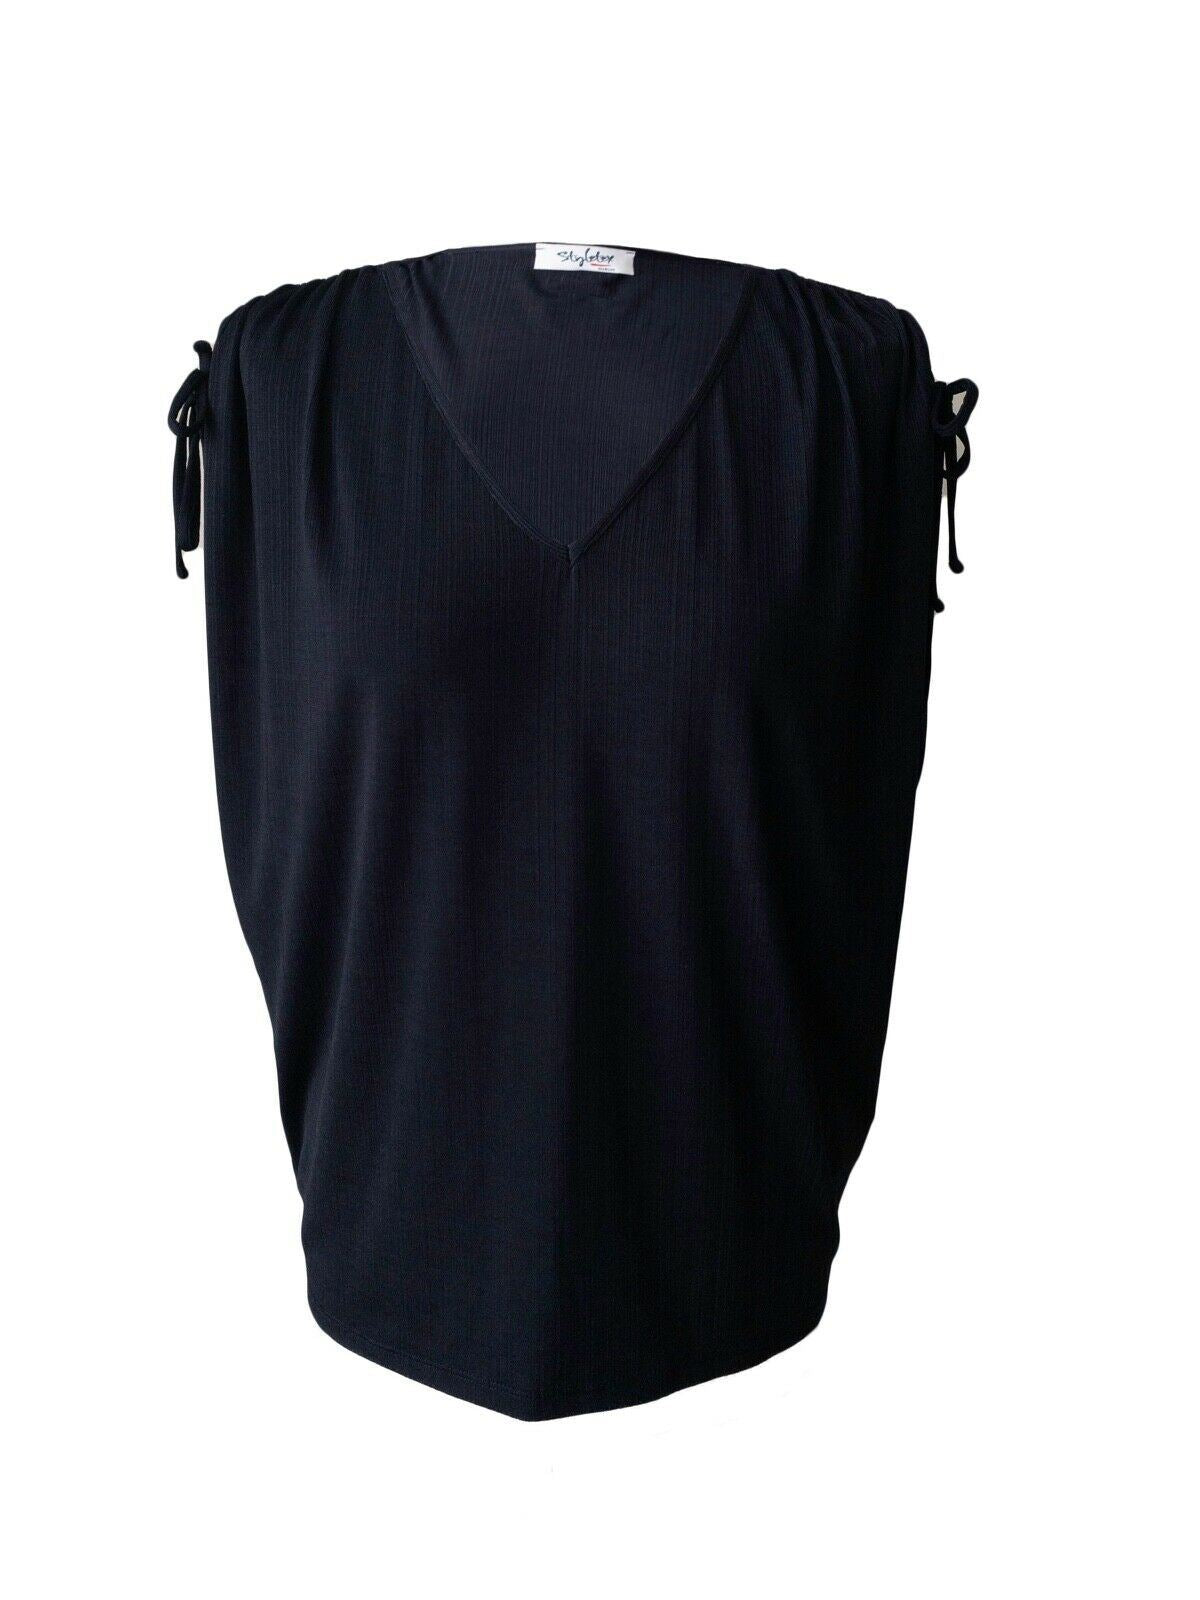 Dark Blue V-Neck Sleeveless Top size 12 Ruched Shoulers - Beagle Boutique Fashion Outlet